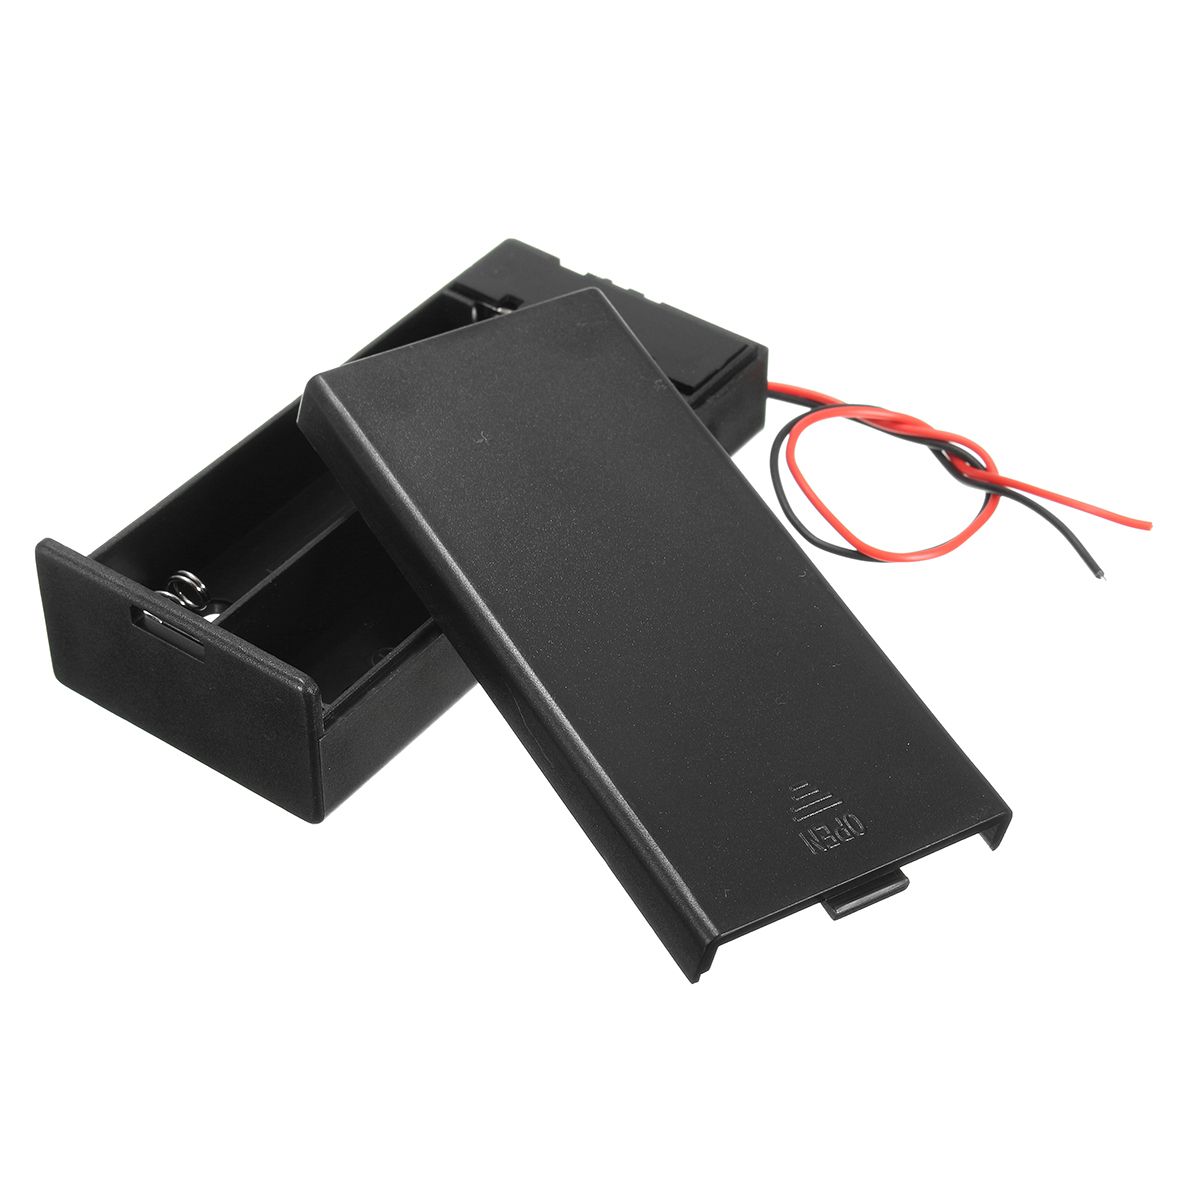 3pcs-Plastic-Battery-Holder-Storage-Box-Case-Container-wONOFF-Switch-For-2x18650-Batteries-37V-1444330